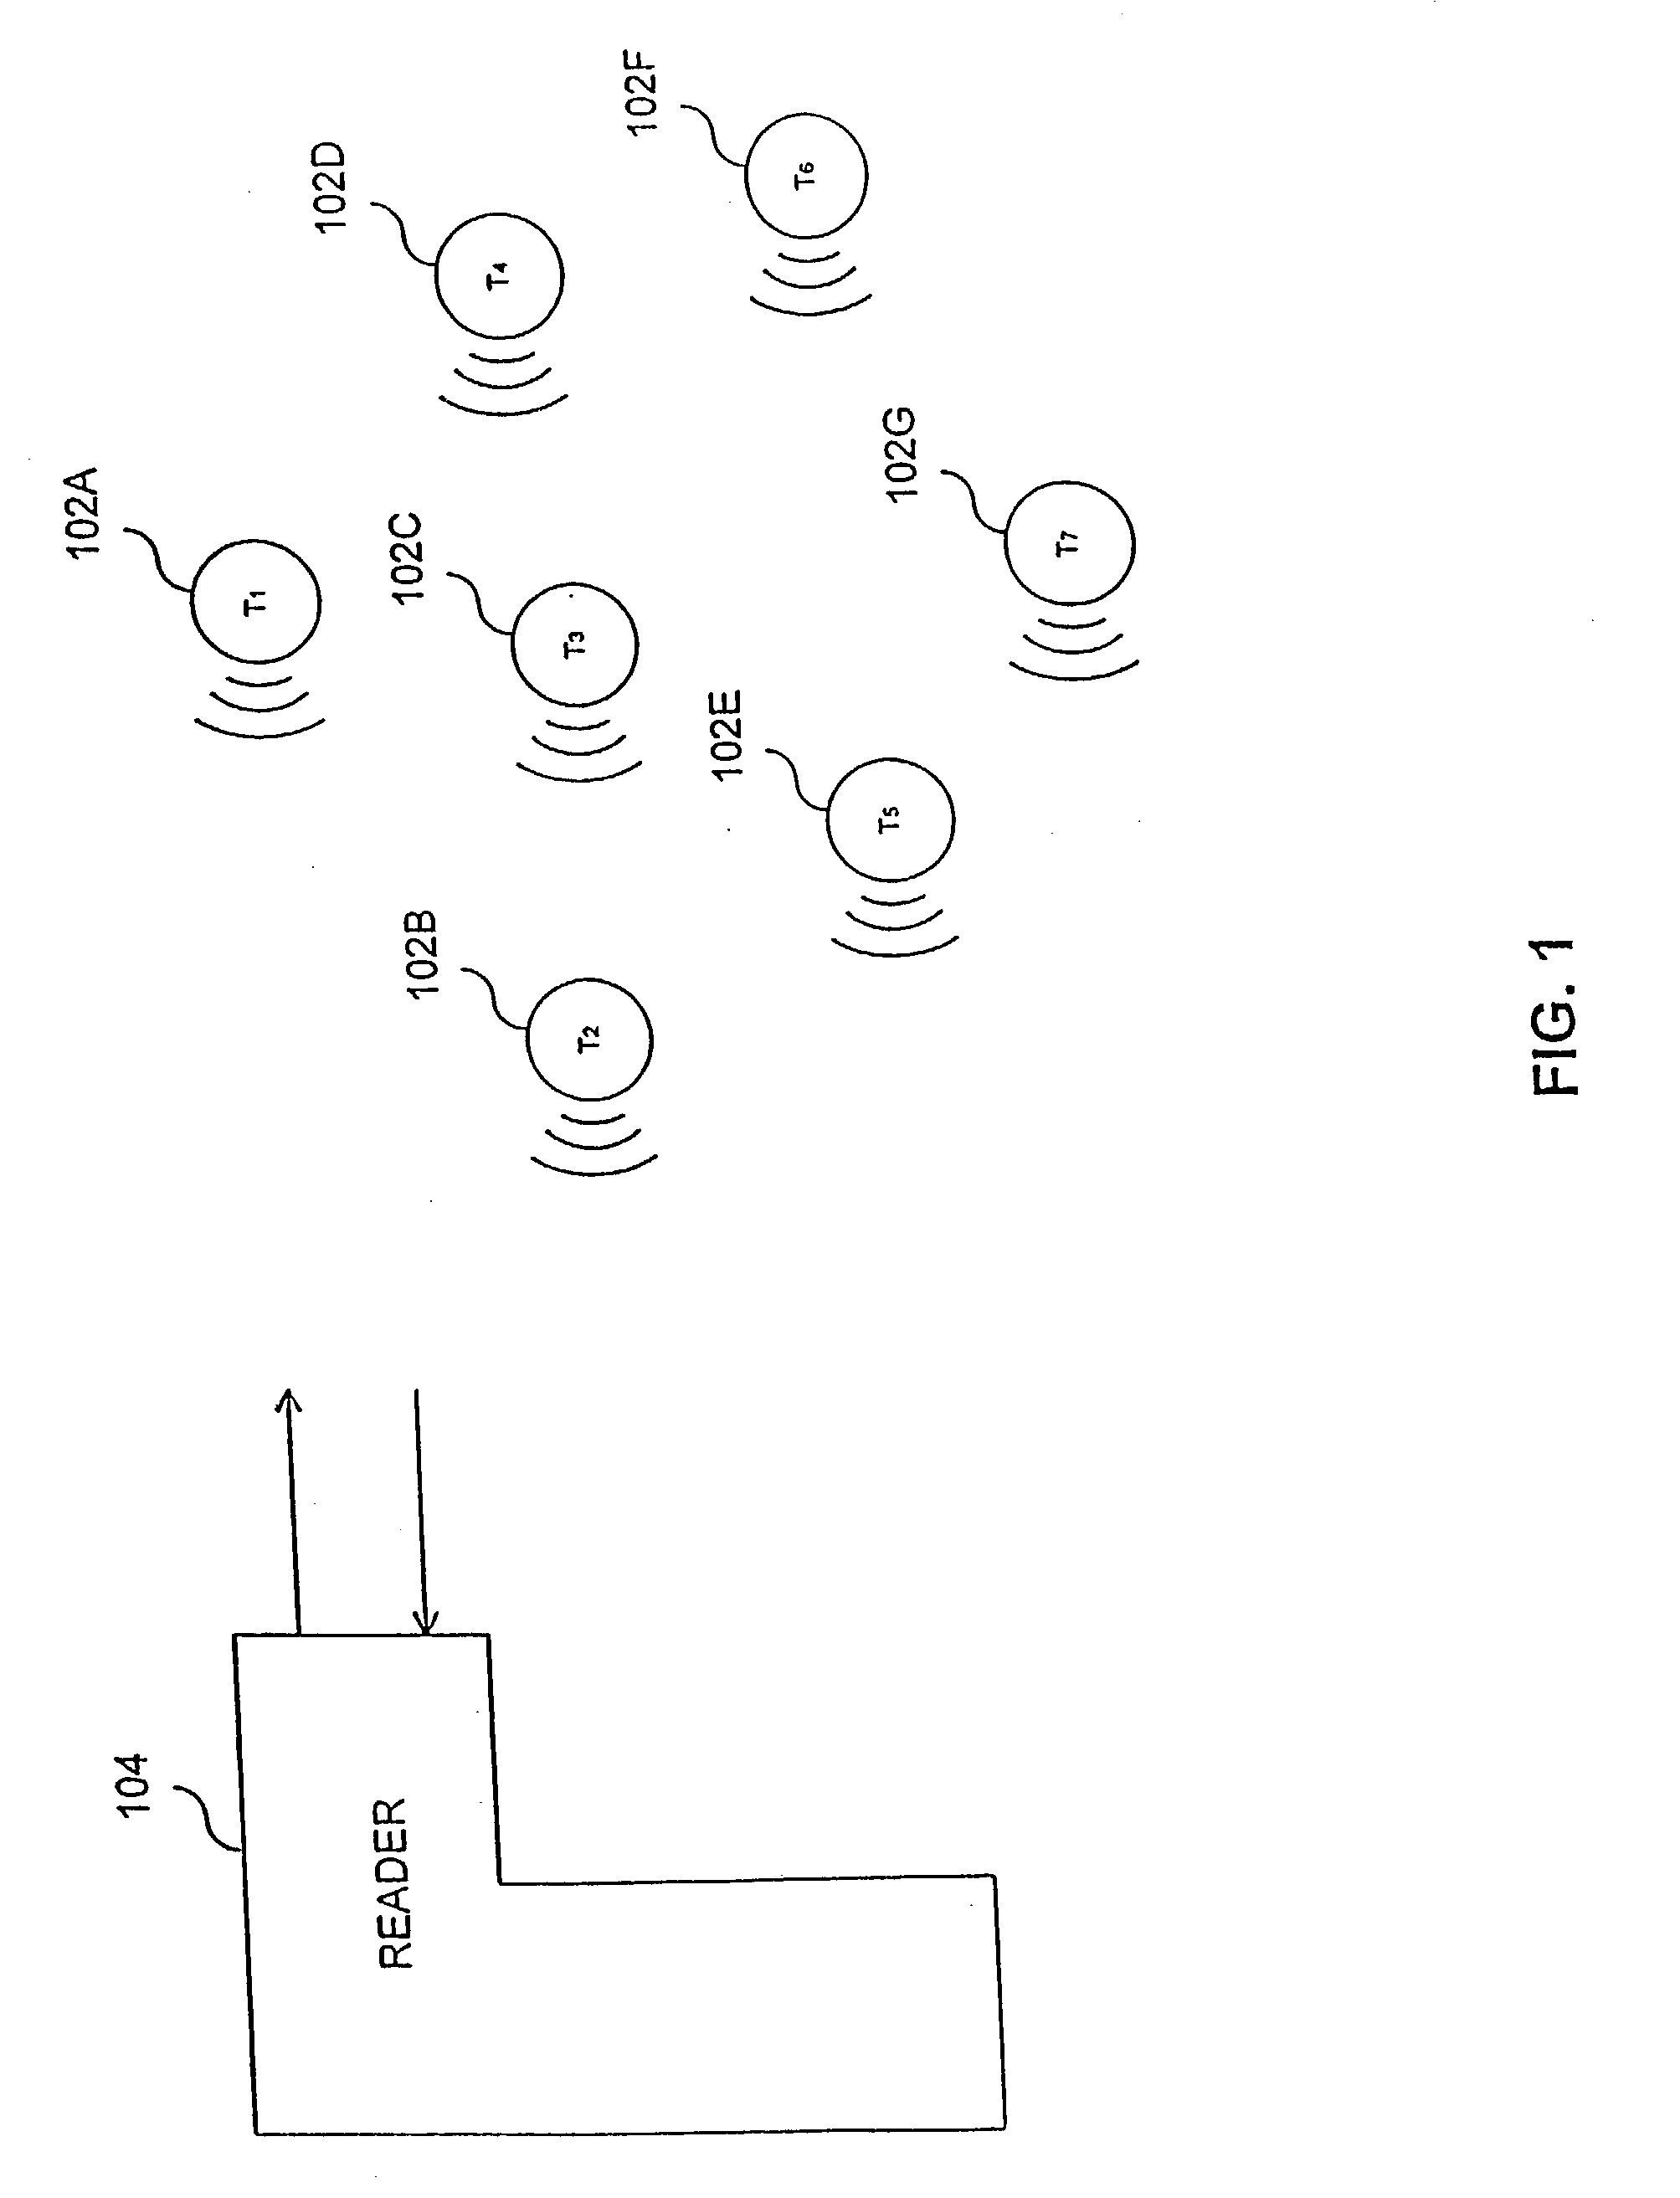 Method and system for optimizing an interrogation of a tag population